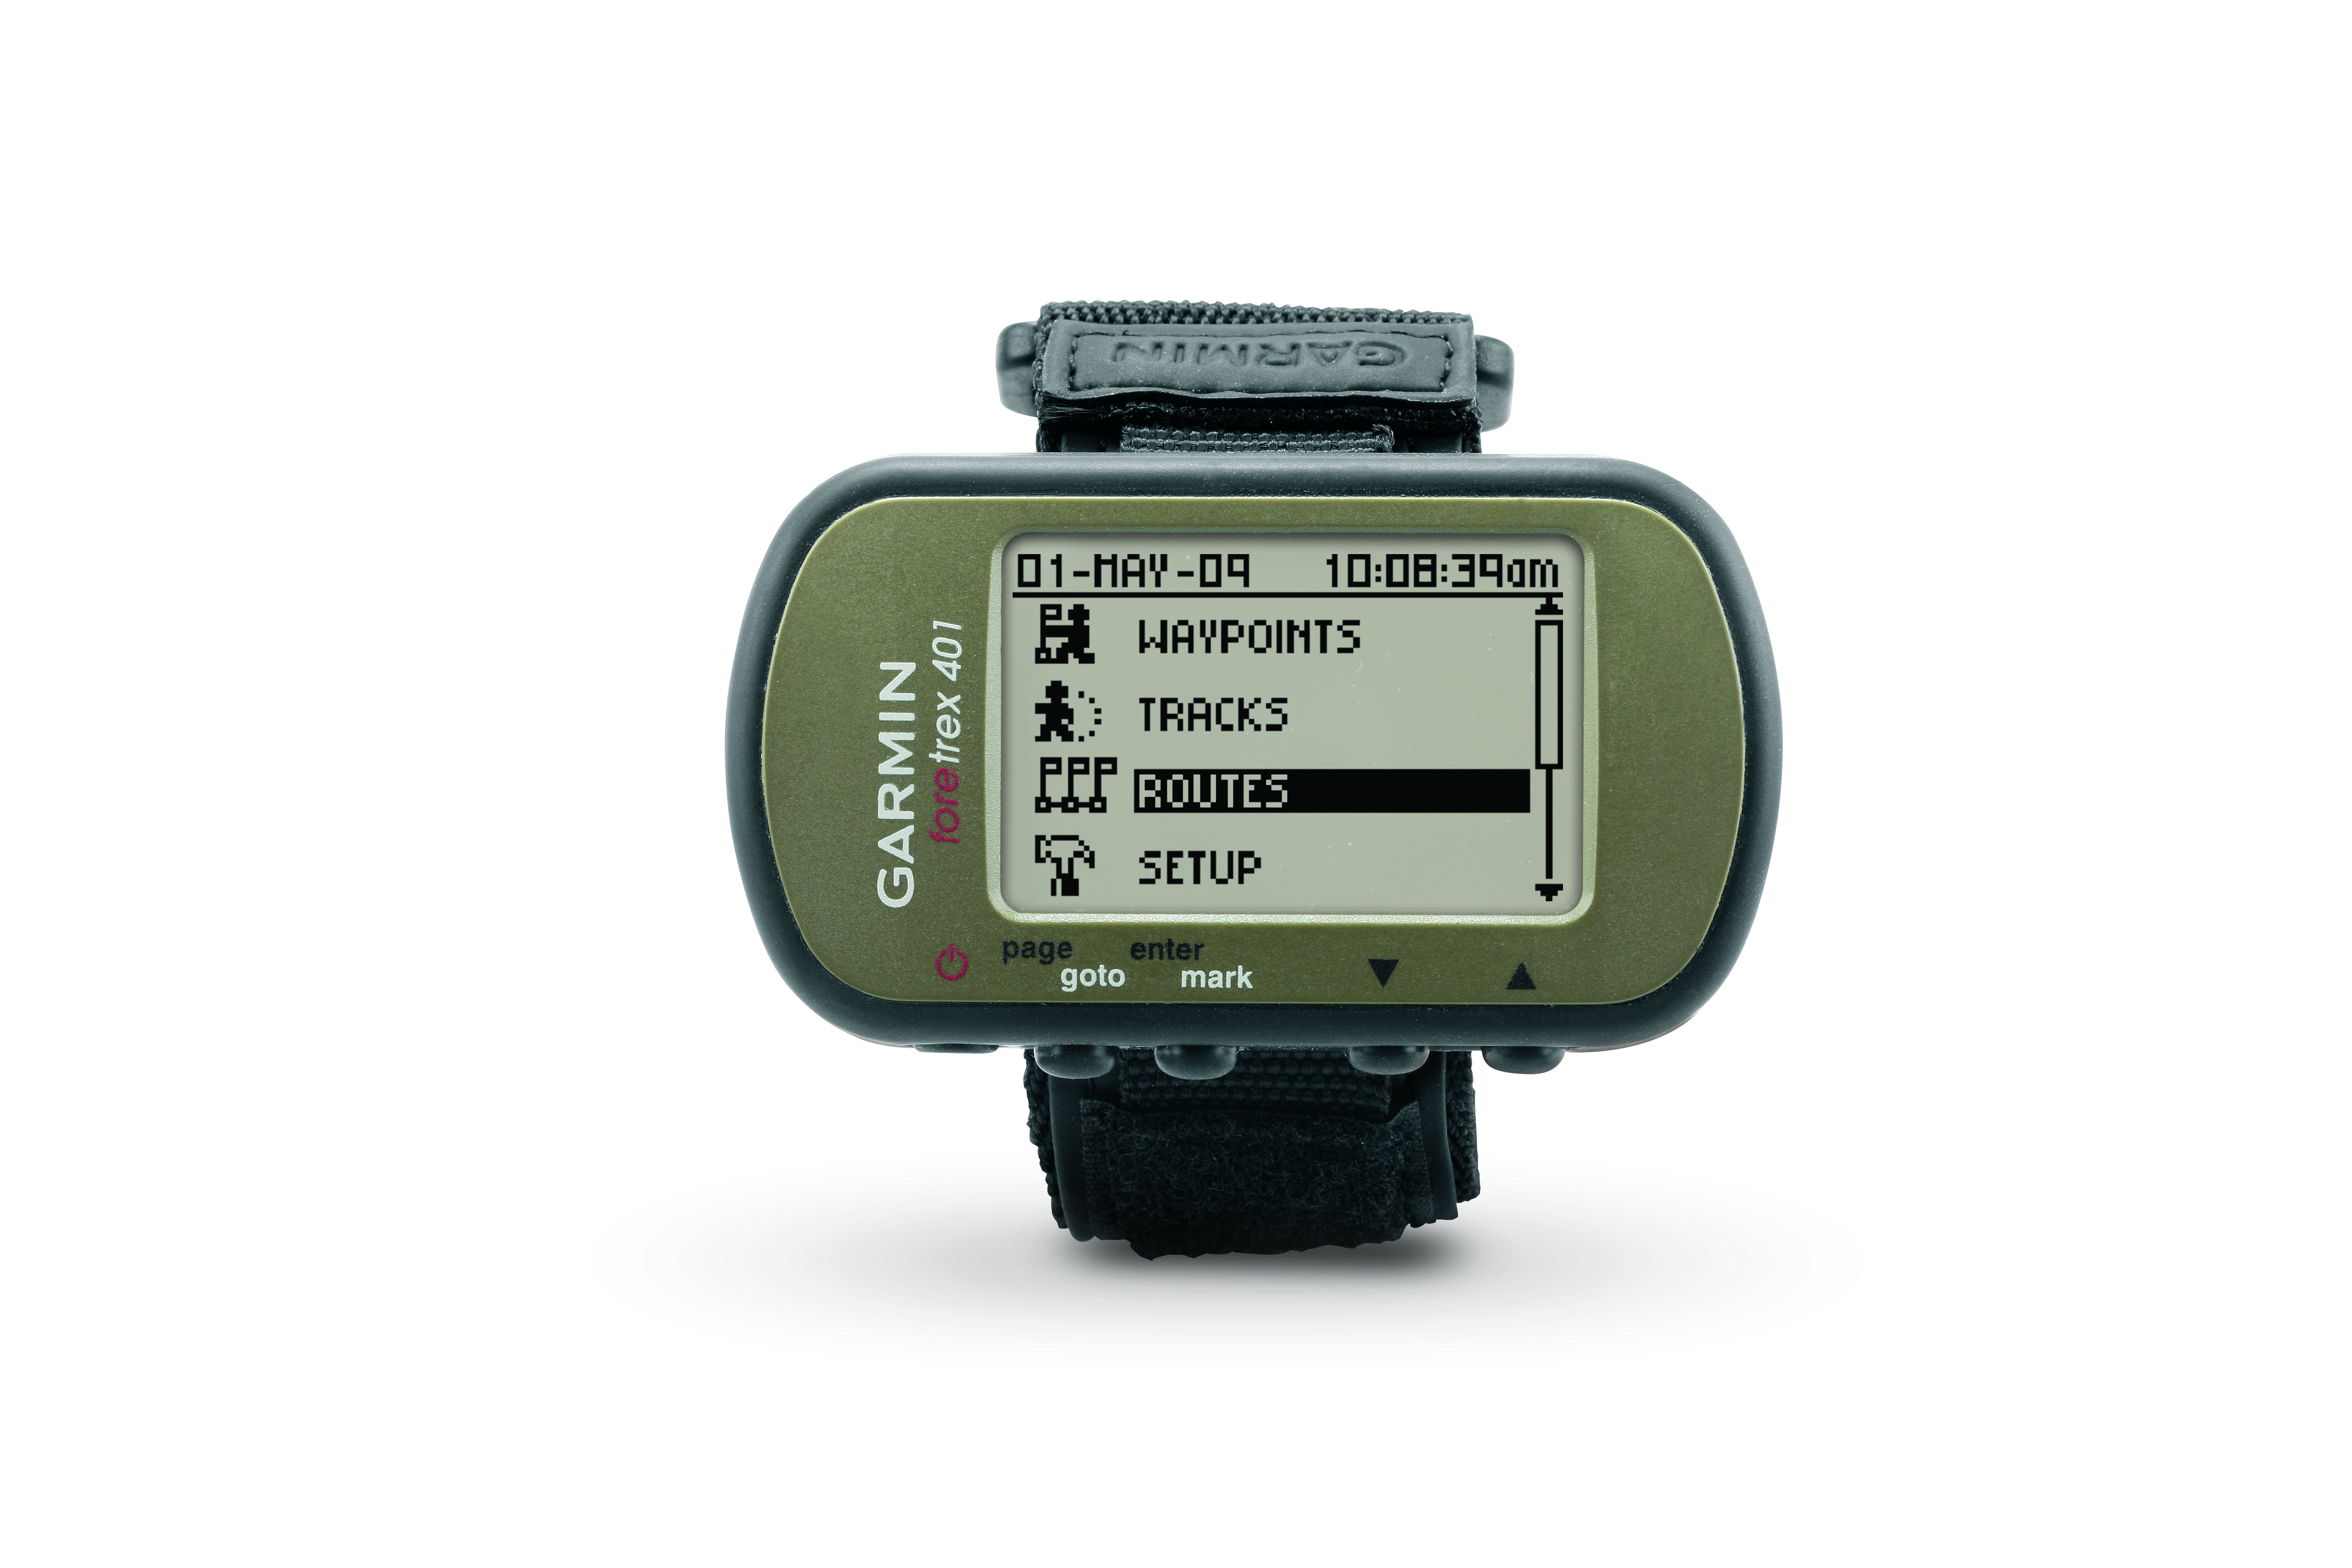 Garmin® announces new Foretrex® 401 and 301, wearable navigation